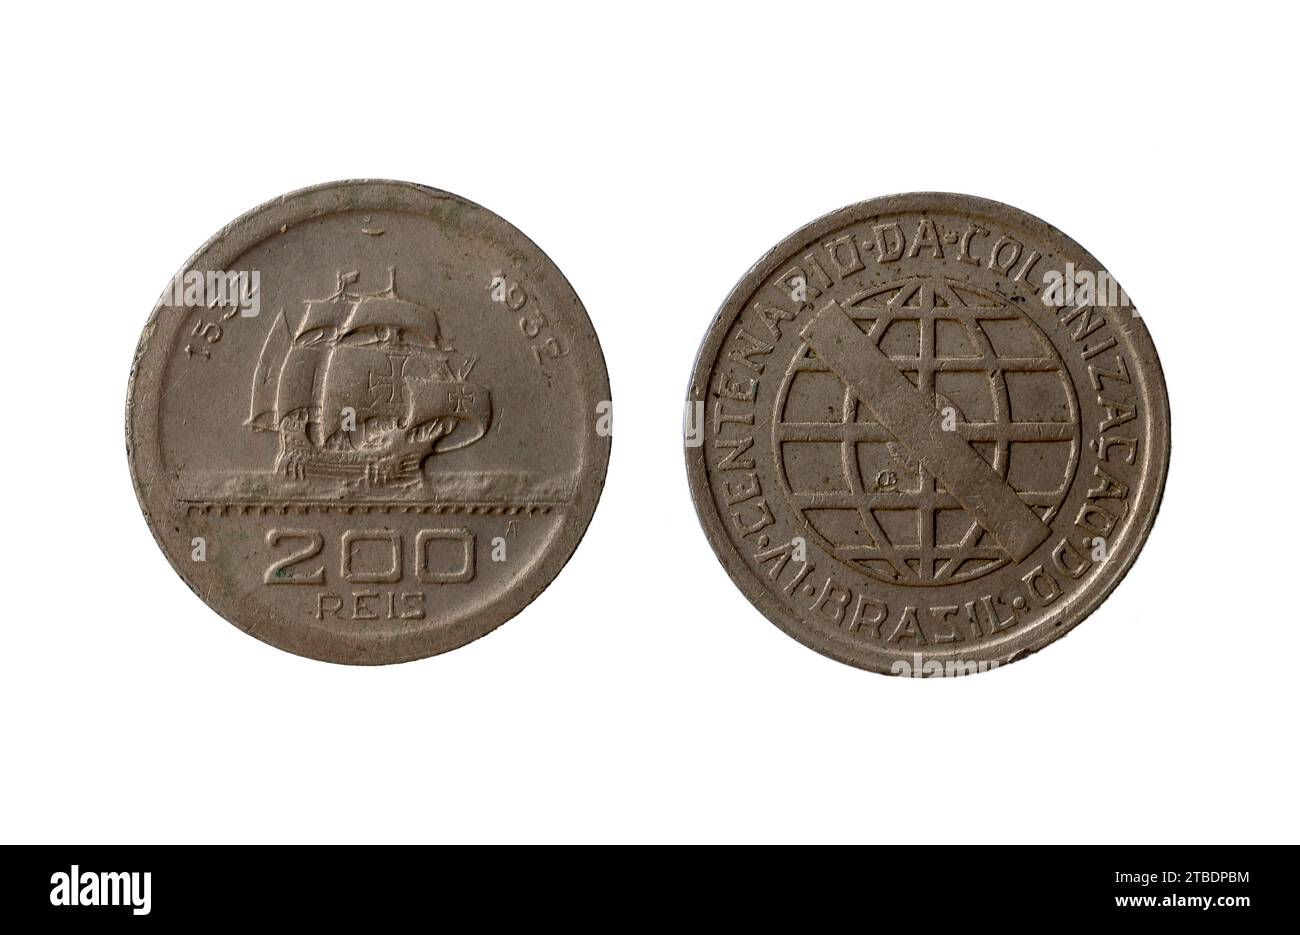 Brazilian 200 réis coin from 1932 made of copper and nickel. IV Centenary of the Colonization of Brazil. 1532 to 1932. Vincentian series. Stock Photo